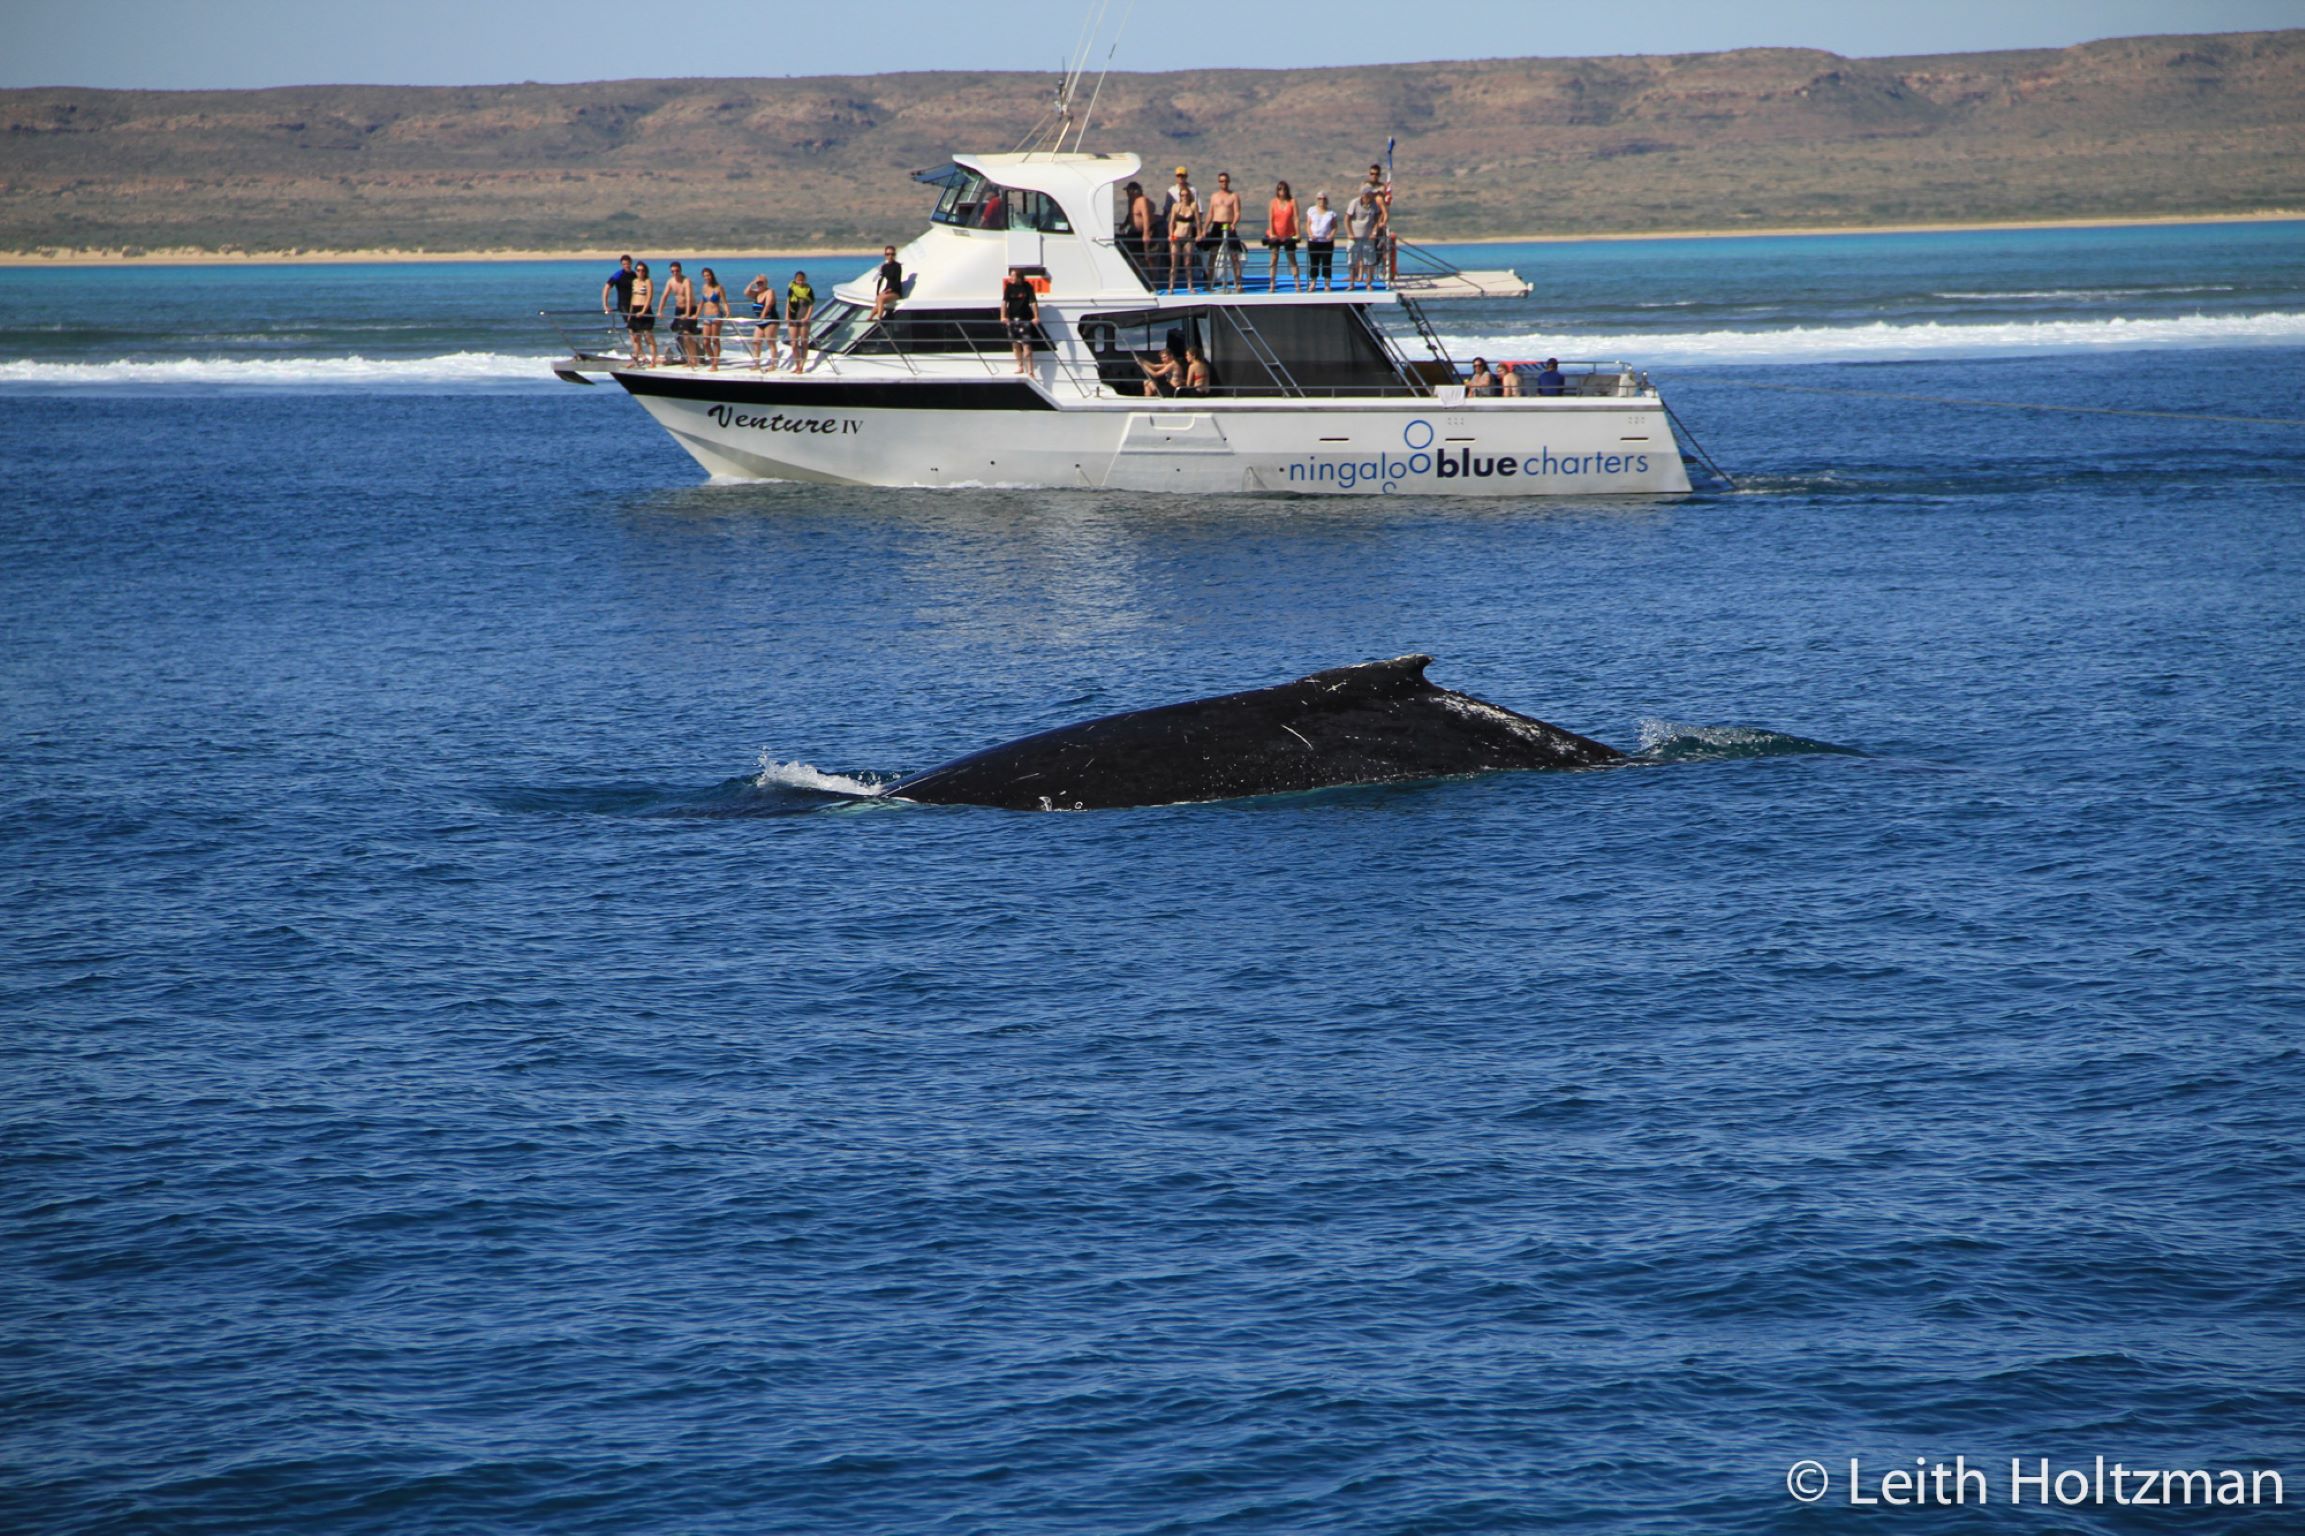 Whale Sharks or Humpback Whales -  Eco Tours